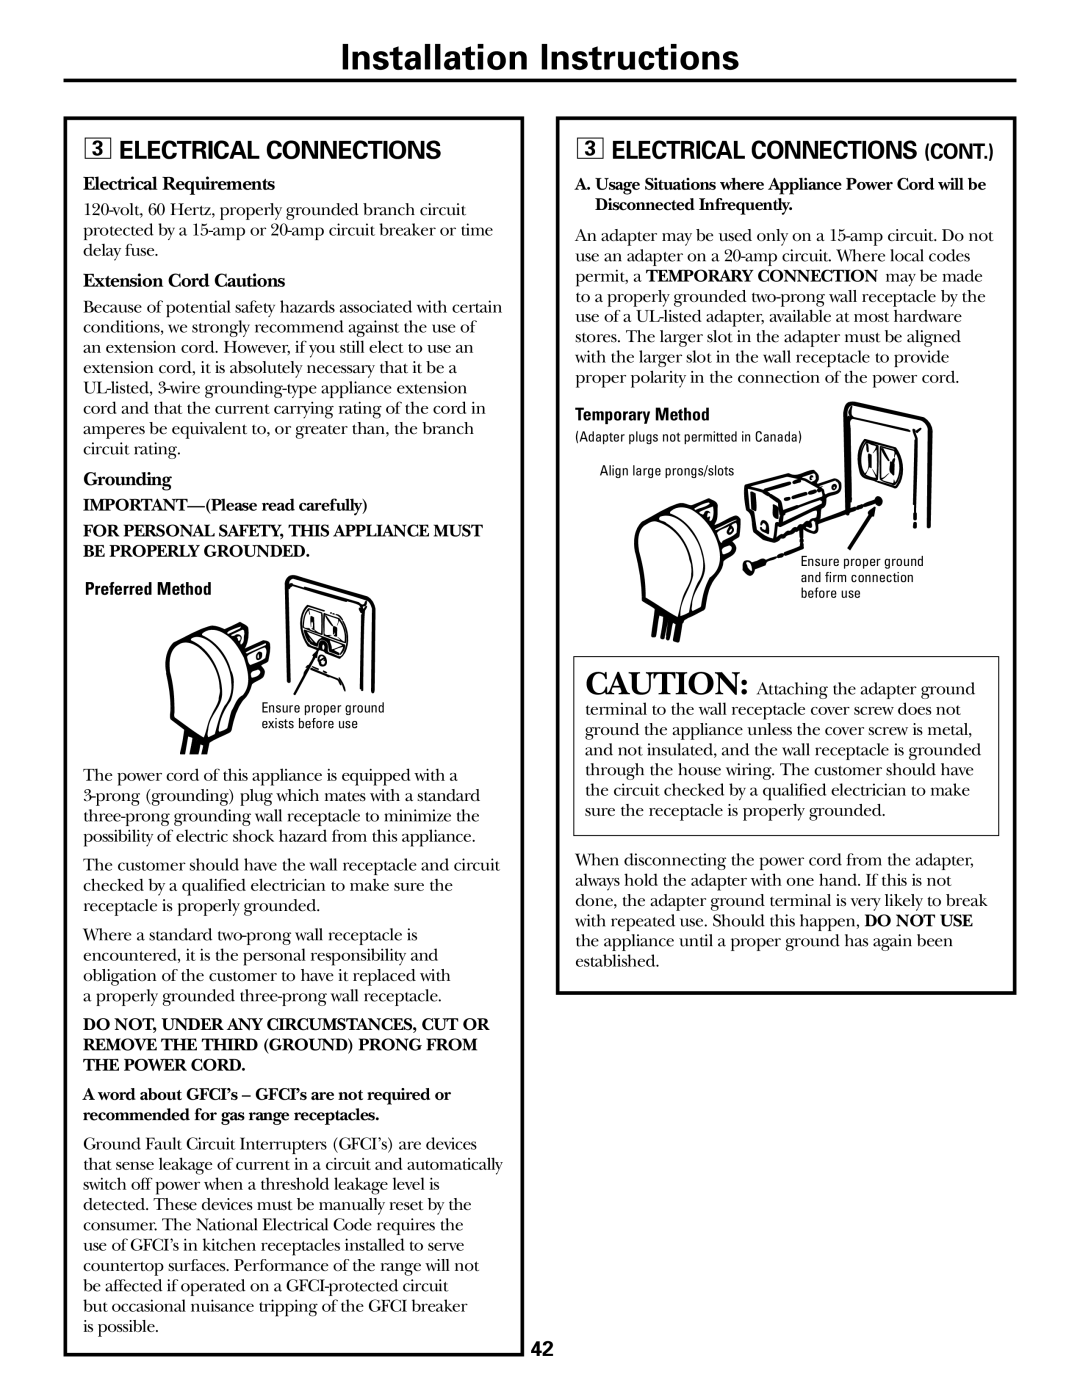 GE EGR2001 3ELECTRICAL CONNECTIONS CONT, Installation Instructions, Electrical Requirements, Extension Cord Cautions 